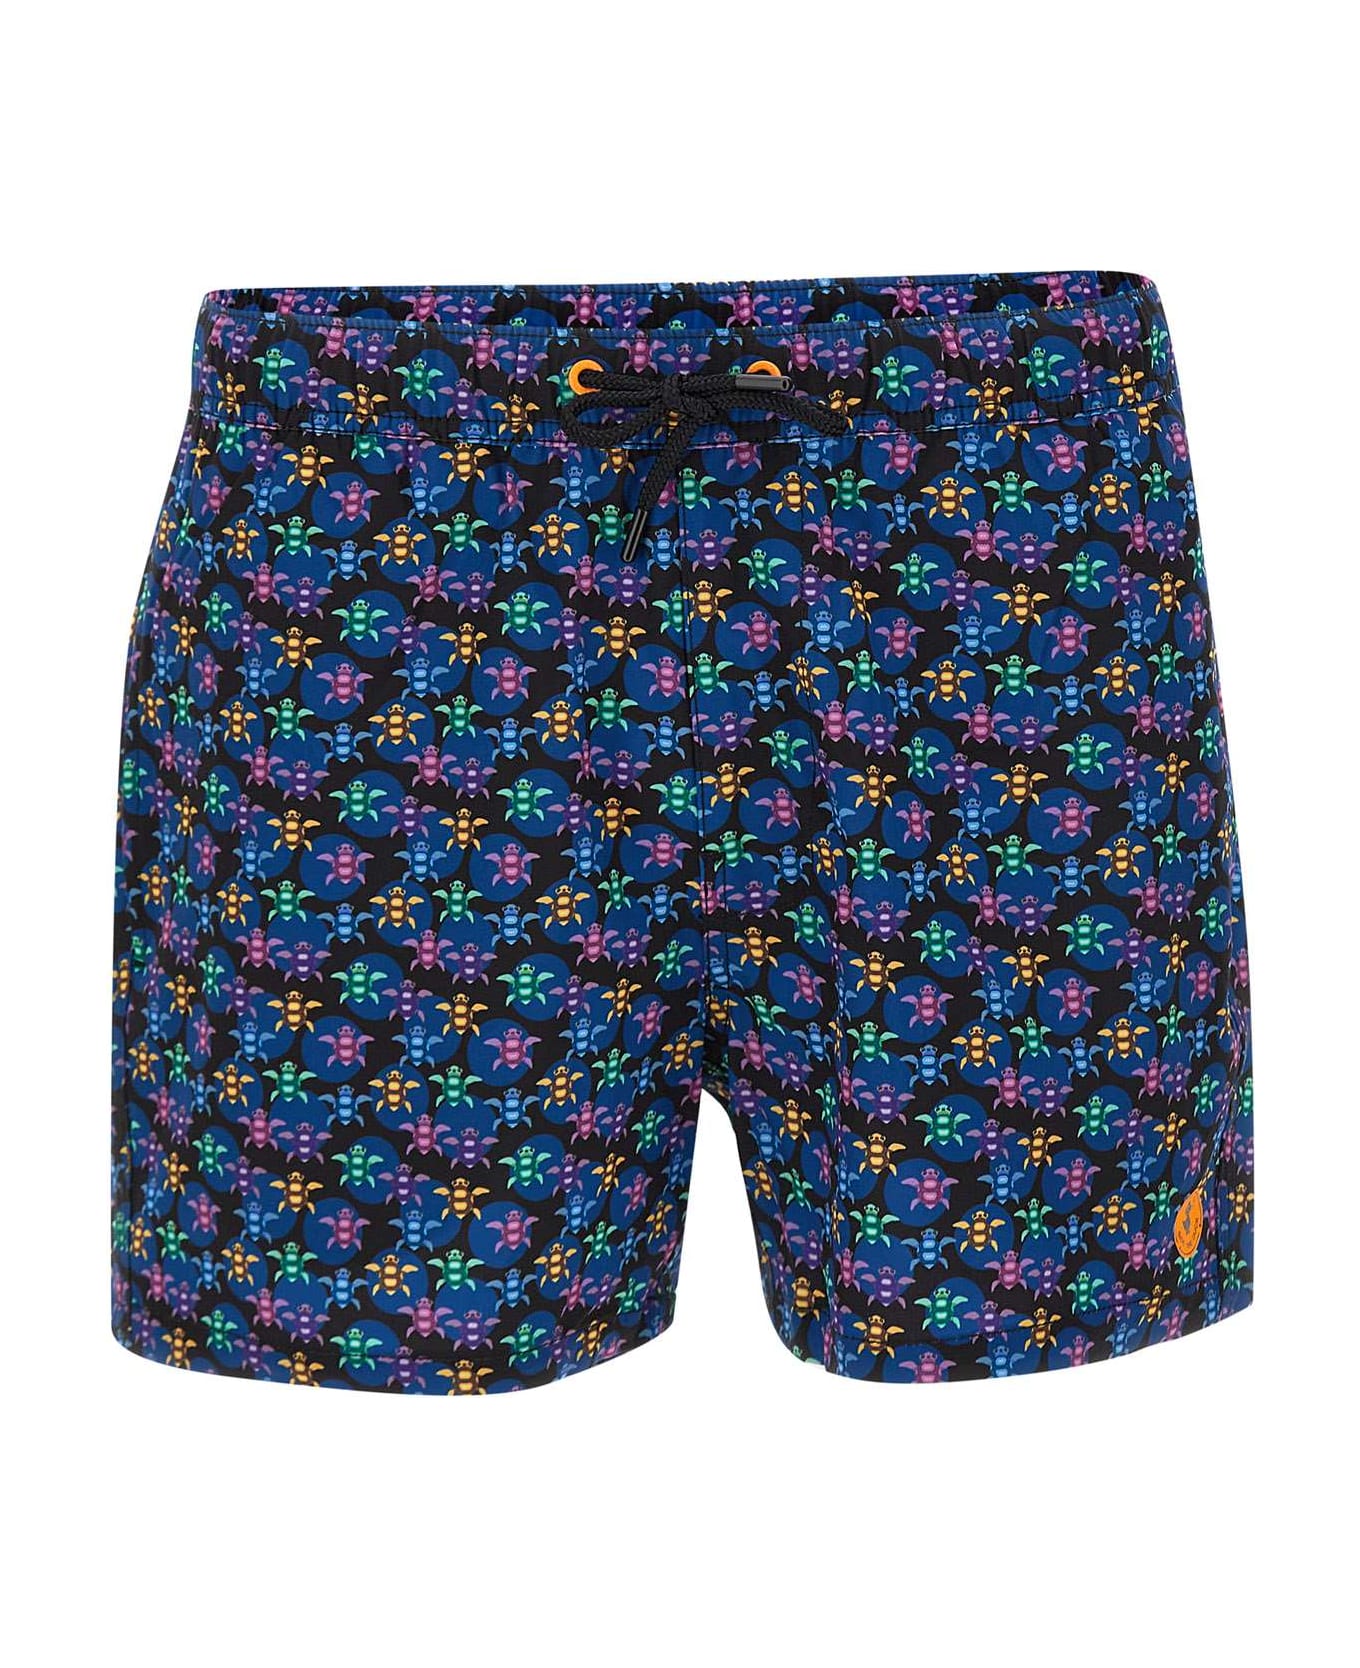 Save the Duck "sipo18 Ademir" Swimsuit - BLUE 水着